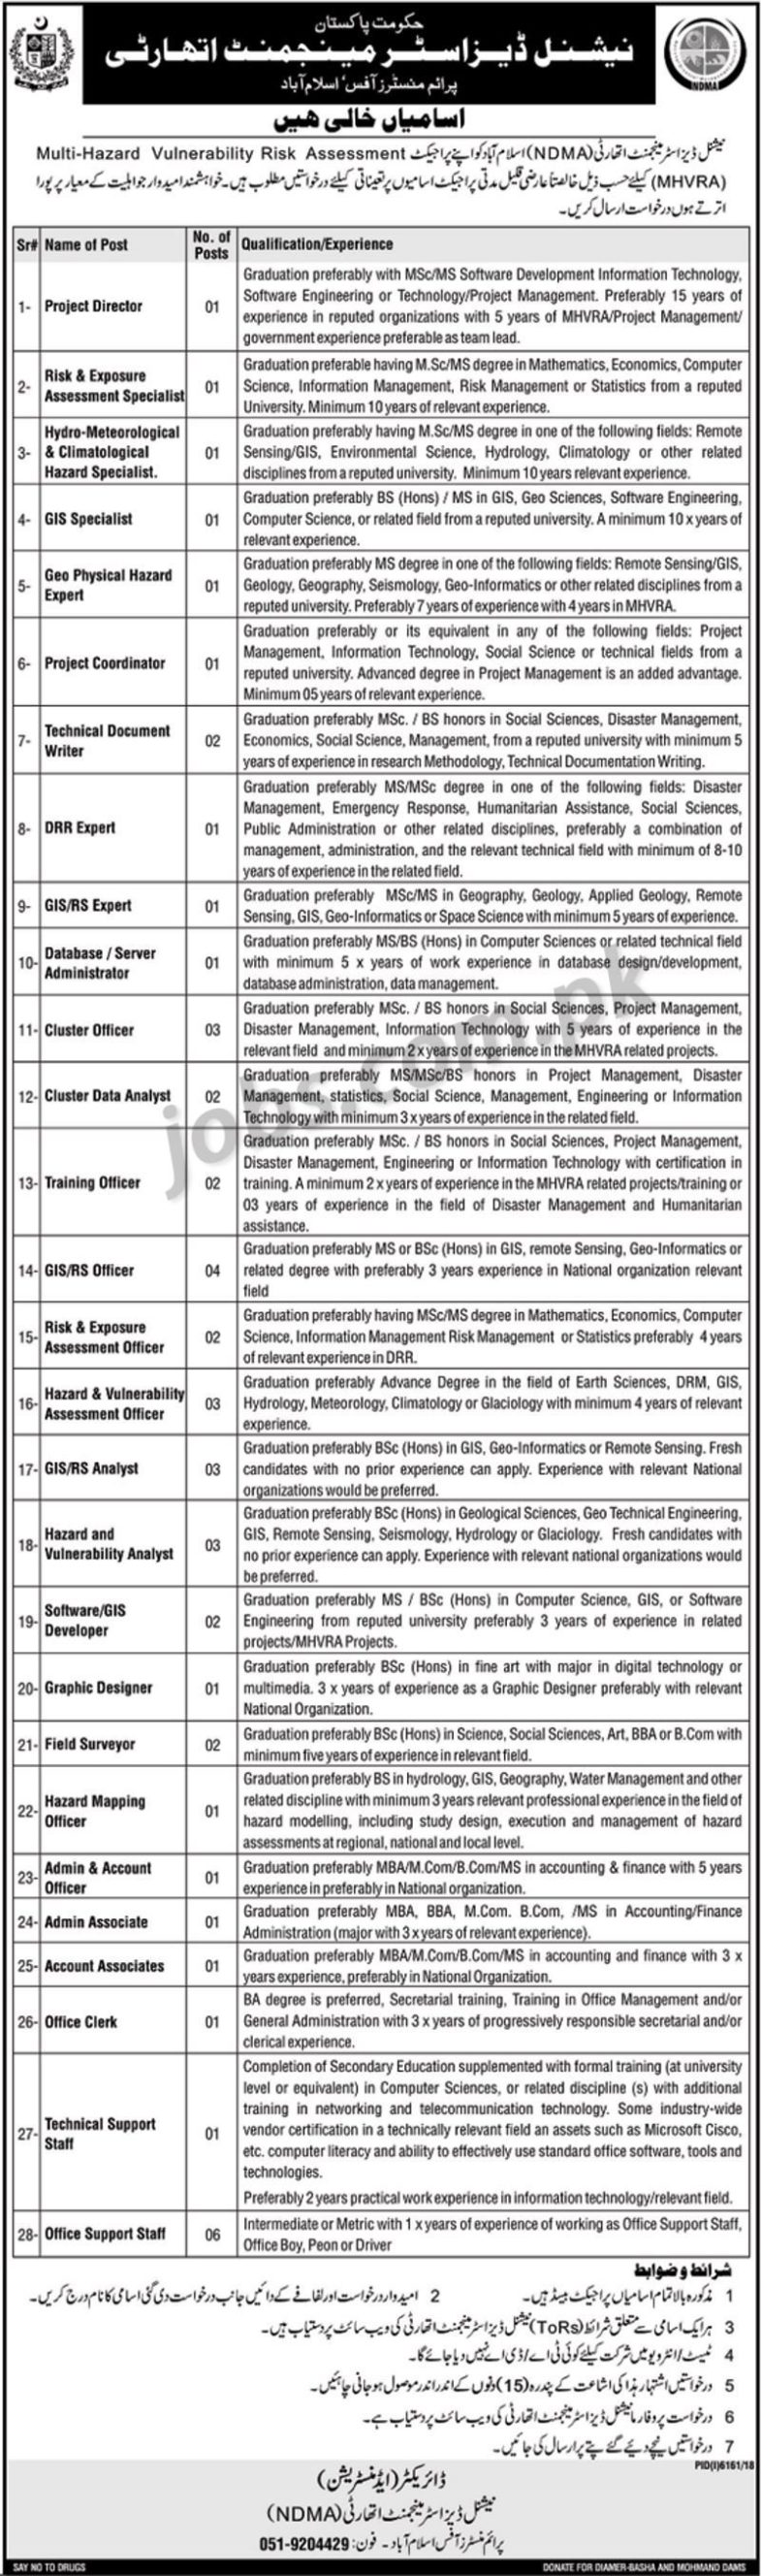 National Disaster Management Authority (NDMA) Jobs 2019 For 50+ Posts Www.Ndma.Gov.Pk (Multiple Categories)